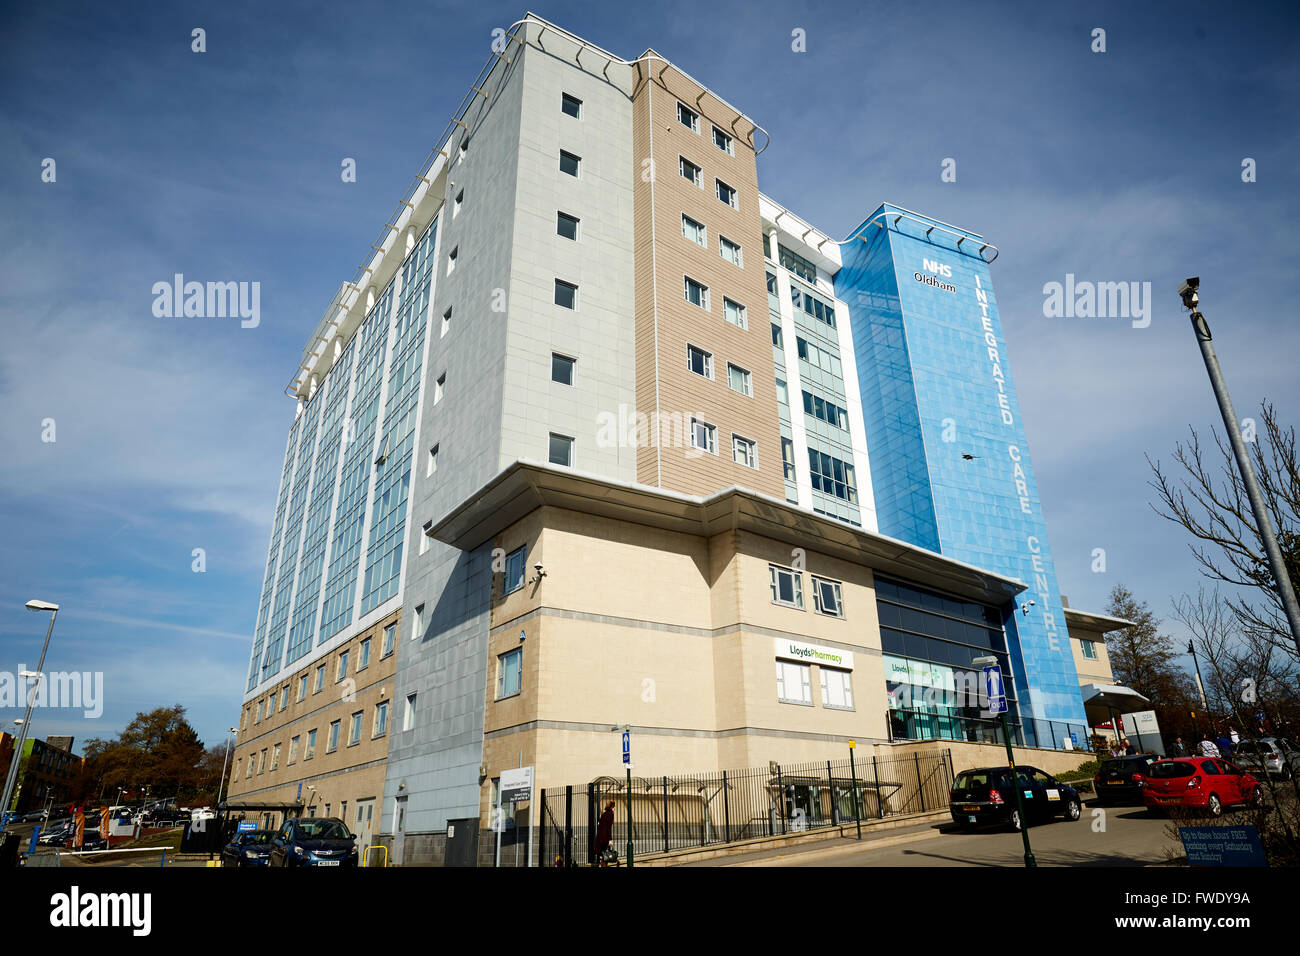 Integrated Care Centre New Radcliffe Street Oldham   Exterior of building sunny blue sky clouds Hospital wards corridors nurse n Stock Photo